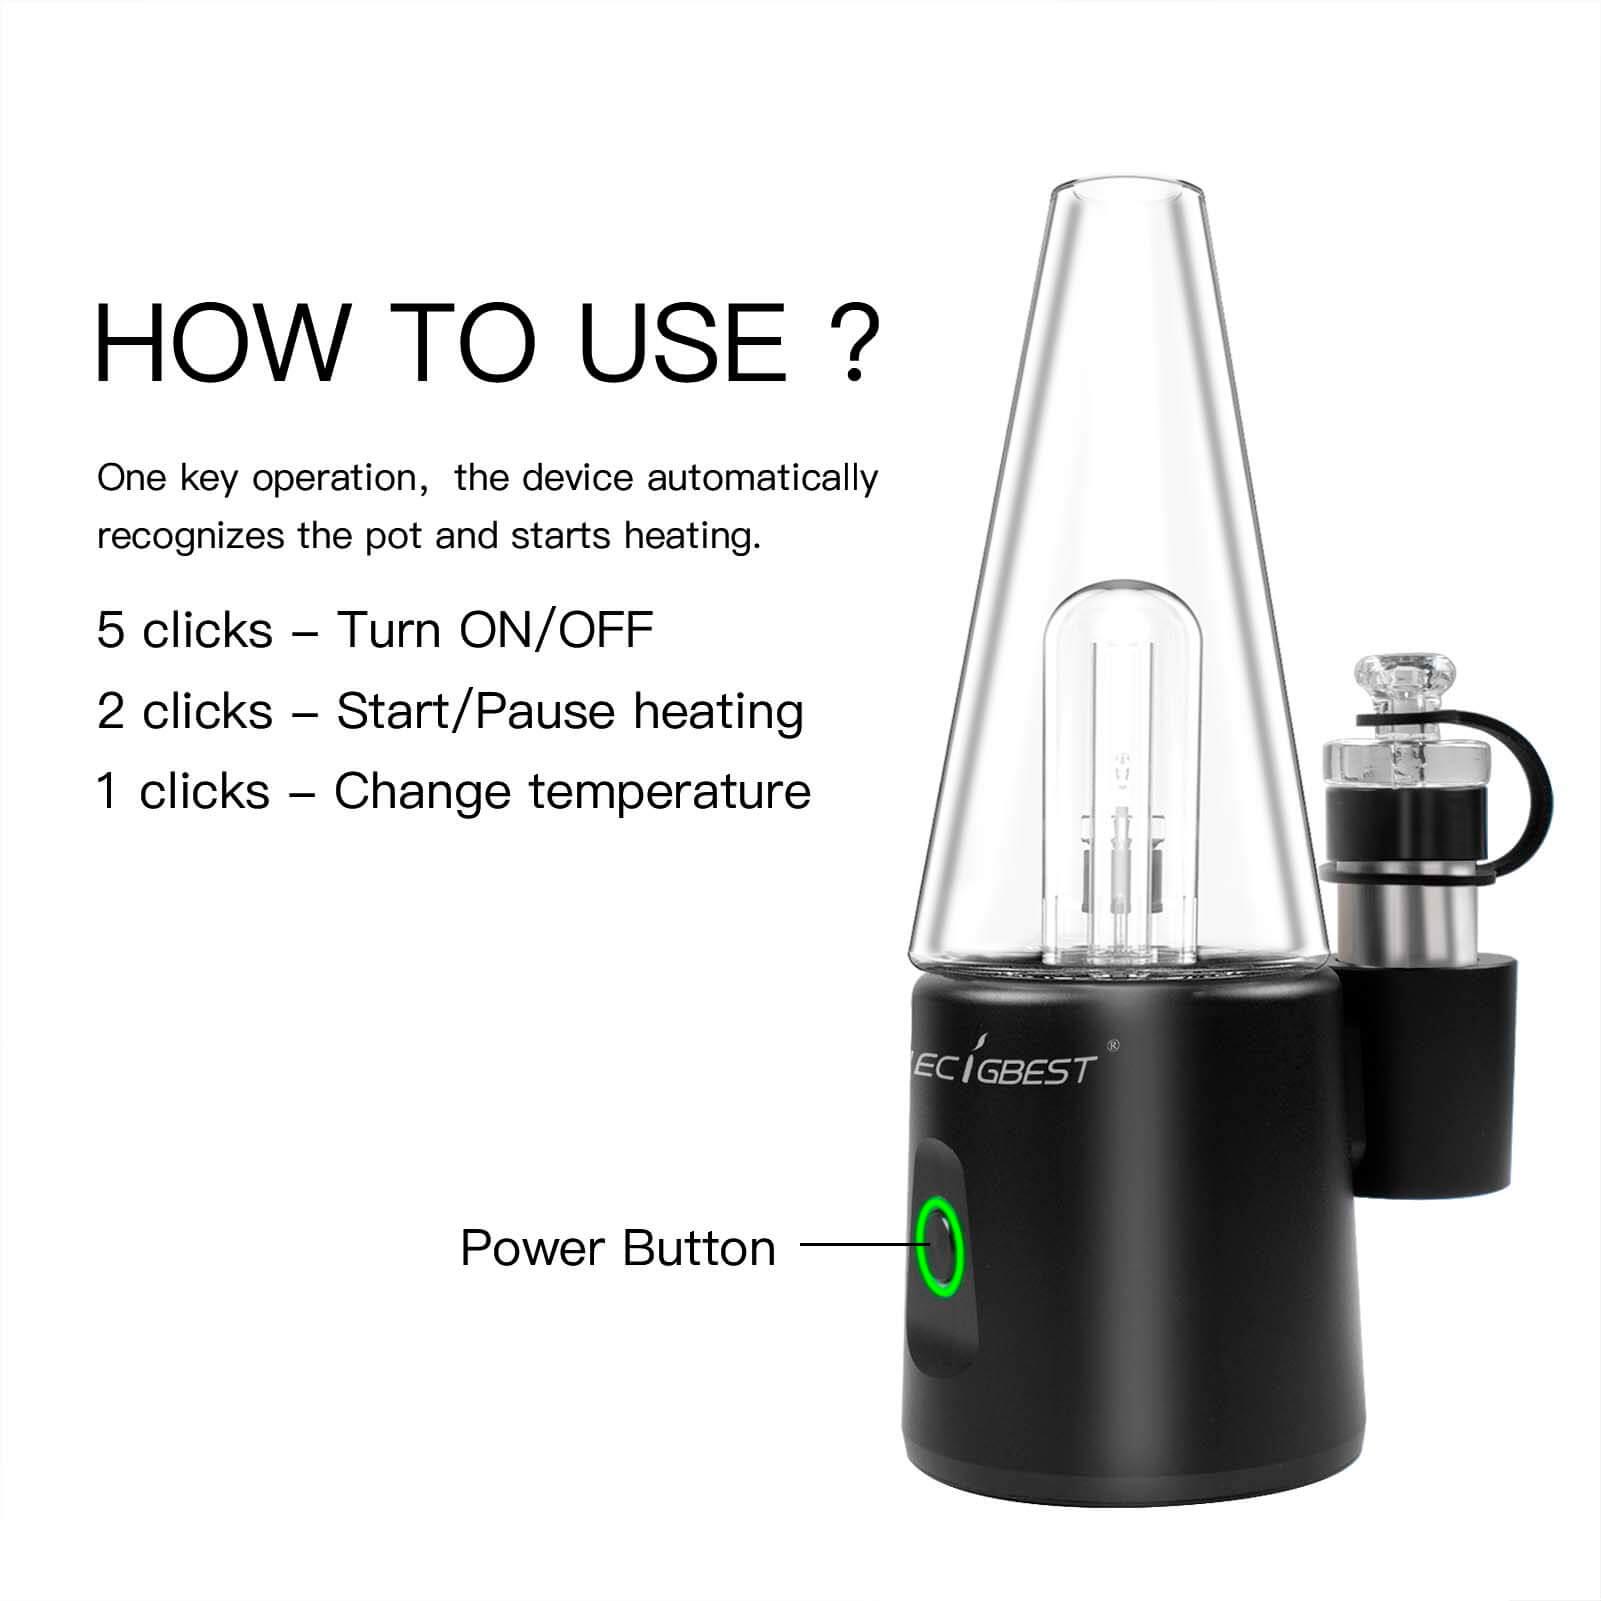 Lookah Dragon Egg – Portable Electric Dab Rig | Smoking Outlet